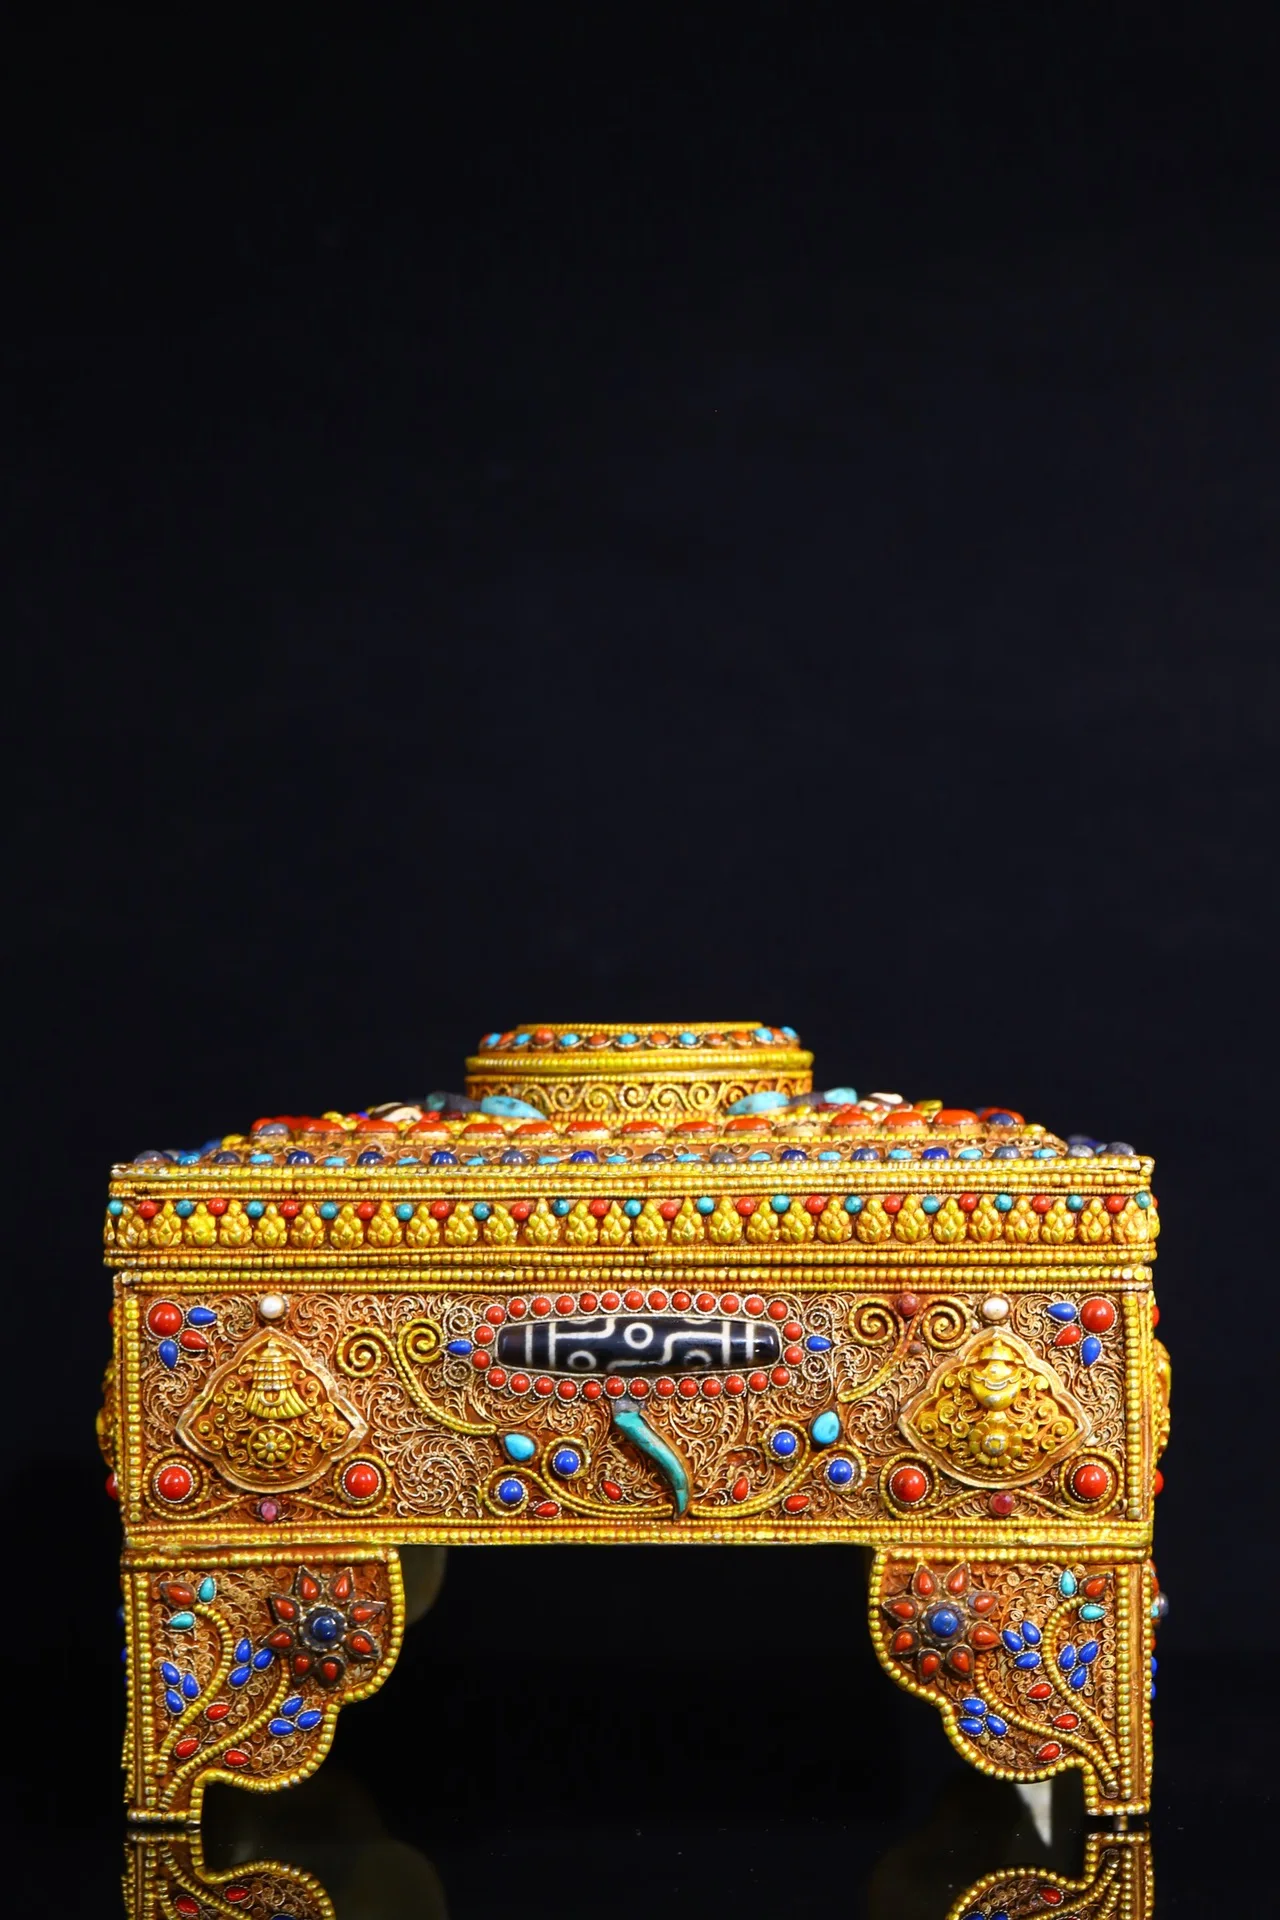 

9"Tibetan Temple Collection Old Tibetan silver Gilt filigree Mosaic Gem treasure chest Jewelry Box Town house Exorcism